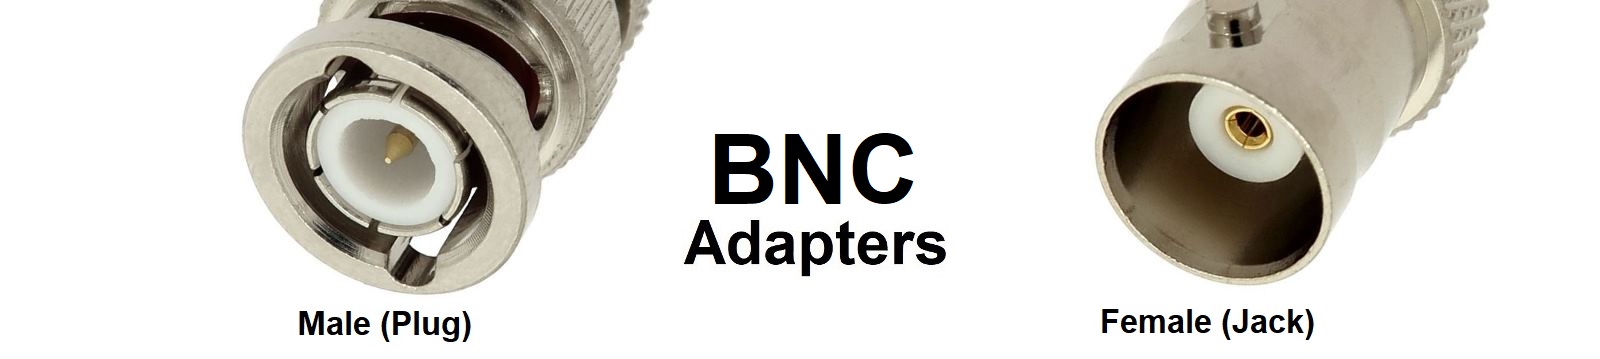 BNC Adapters Category Banner - Max-Gain Systems, Inc.